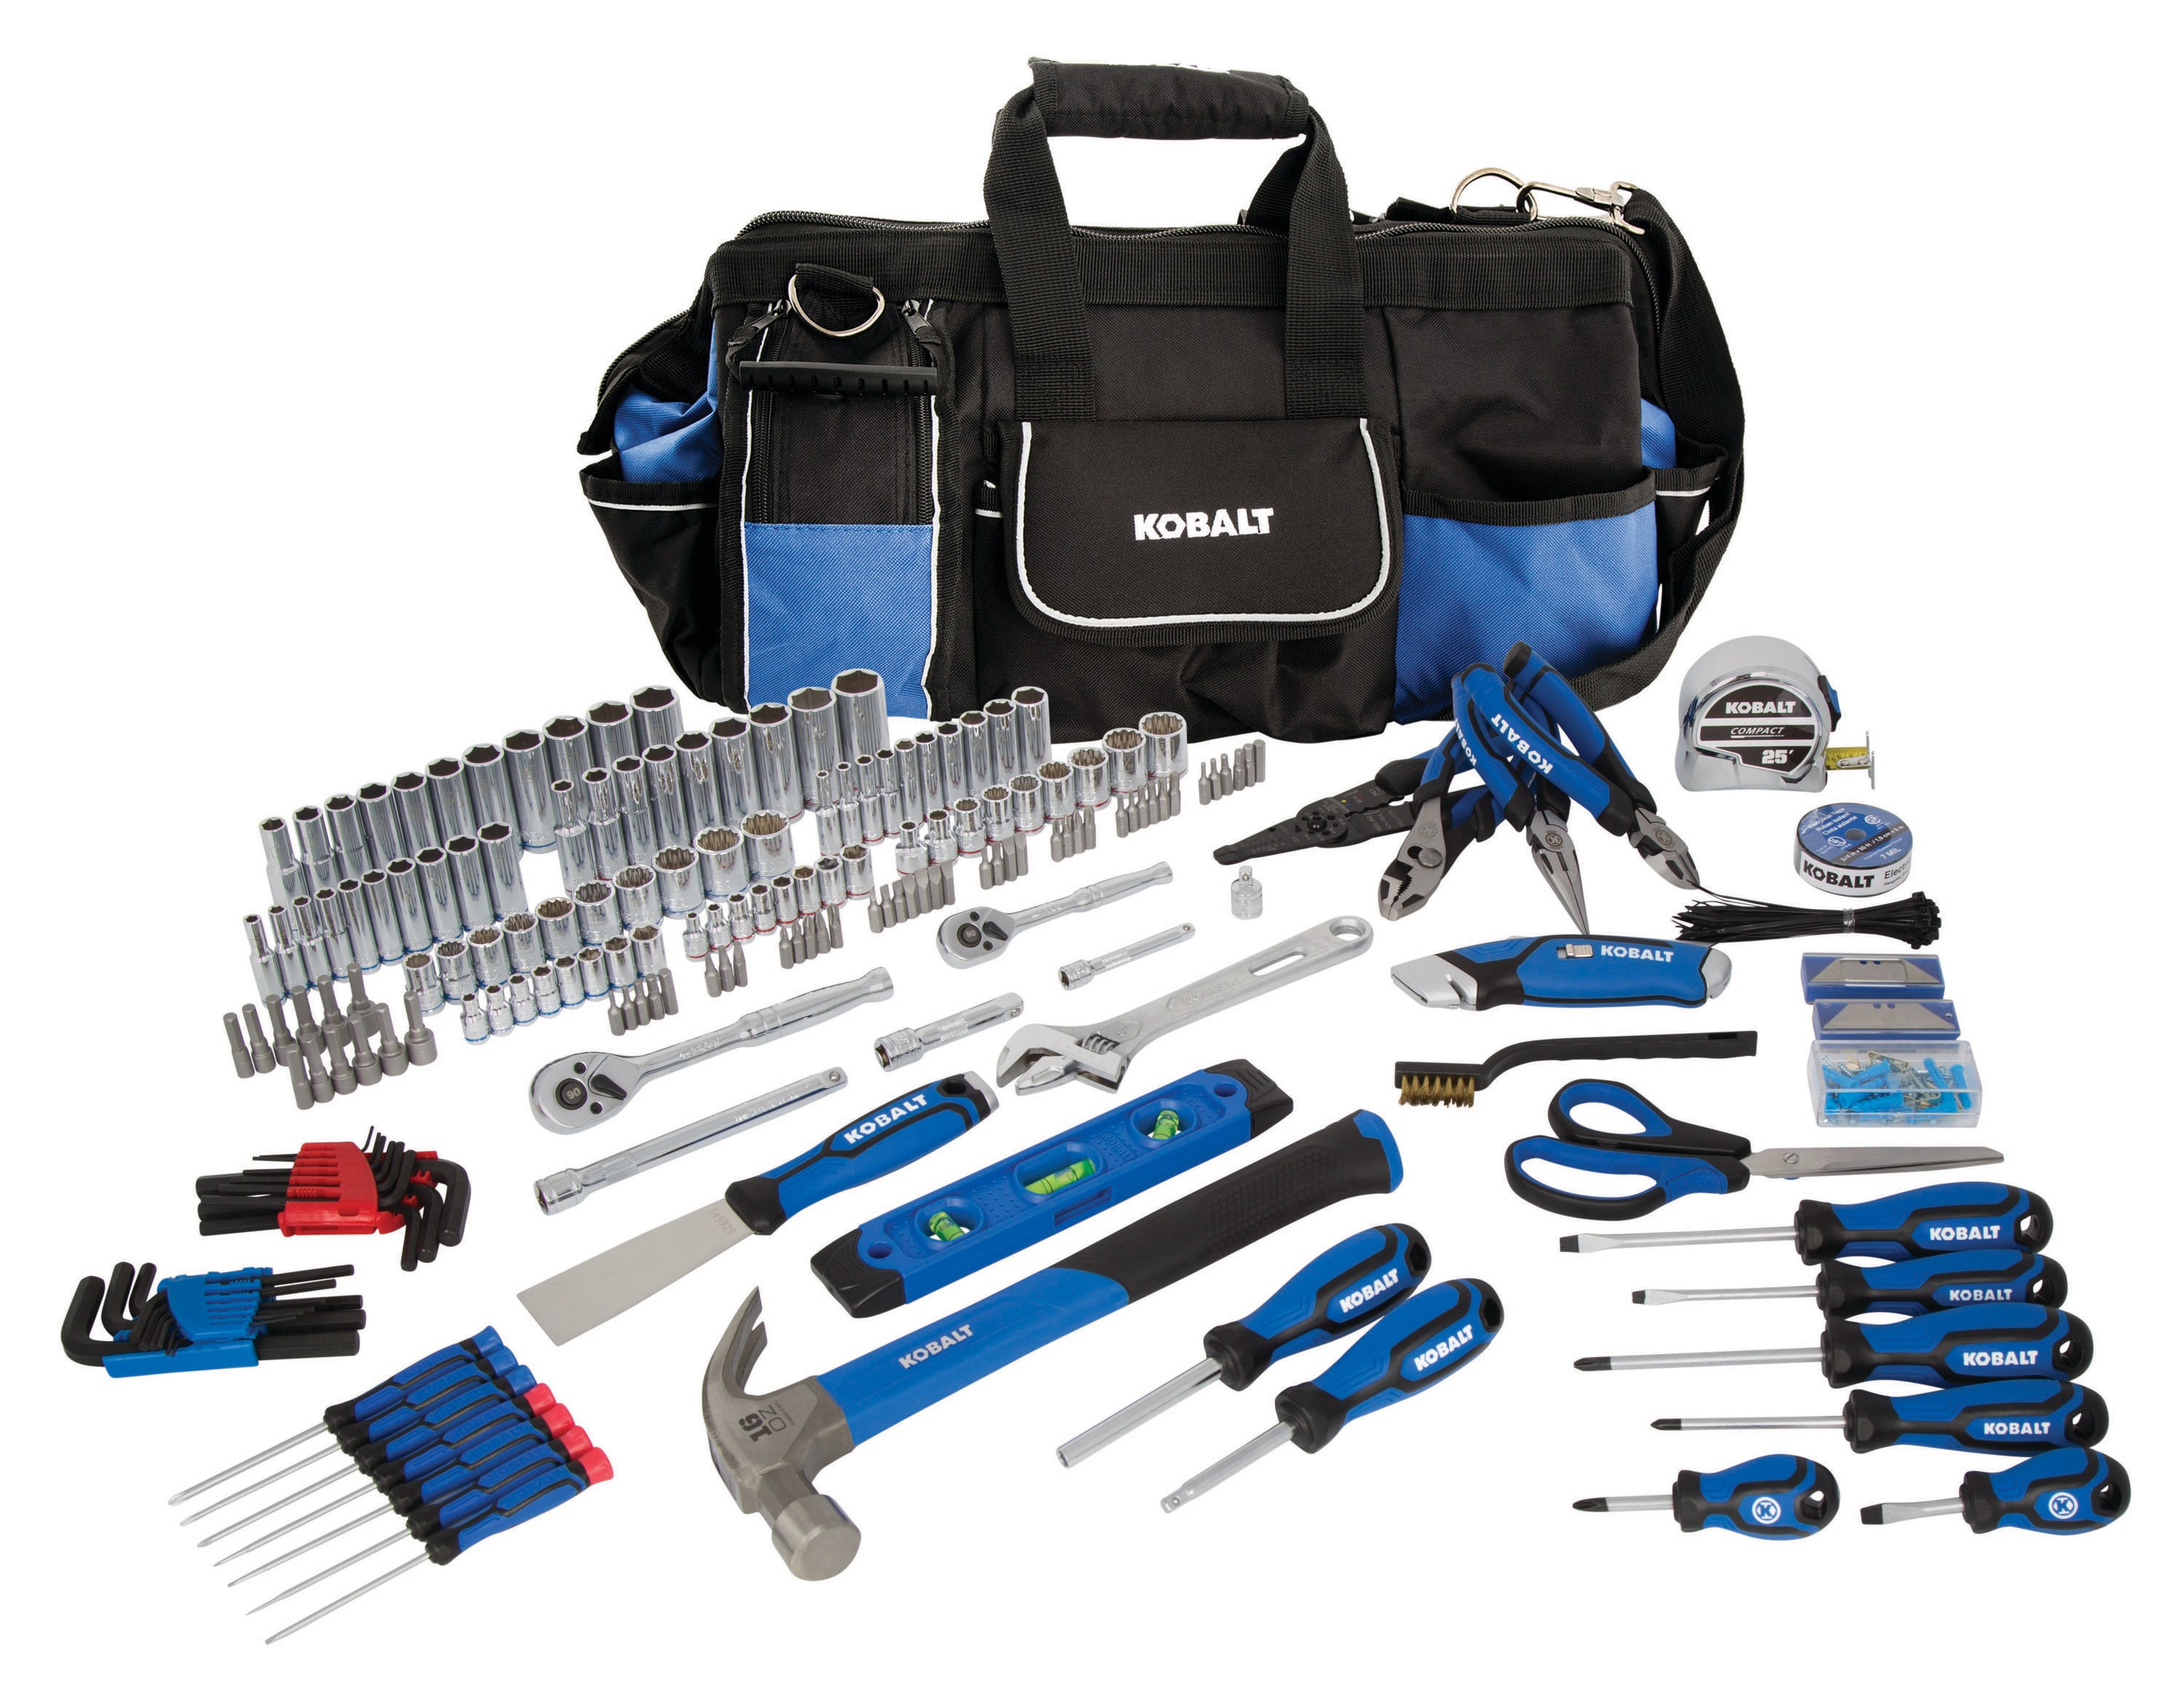 BLACK+DECKER 35-Piece Household Tool Set with Soft Case in the